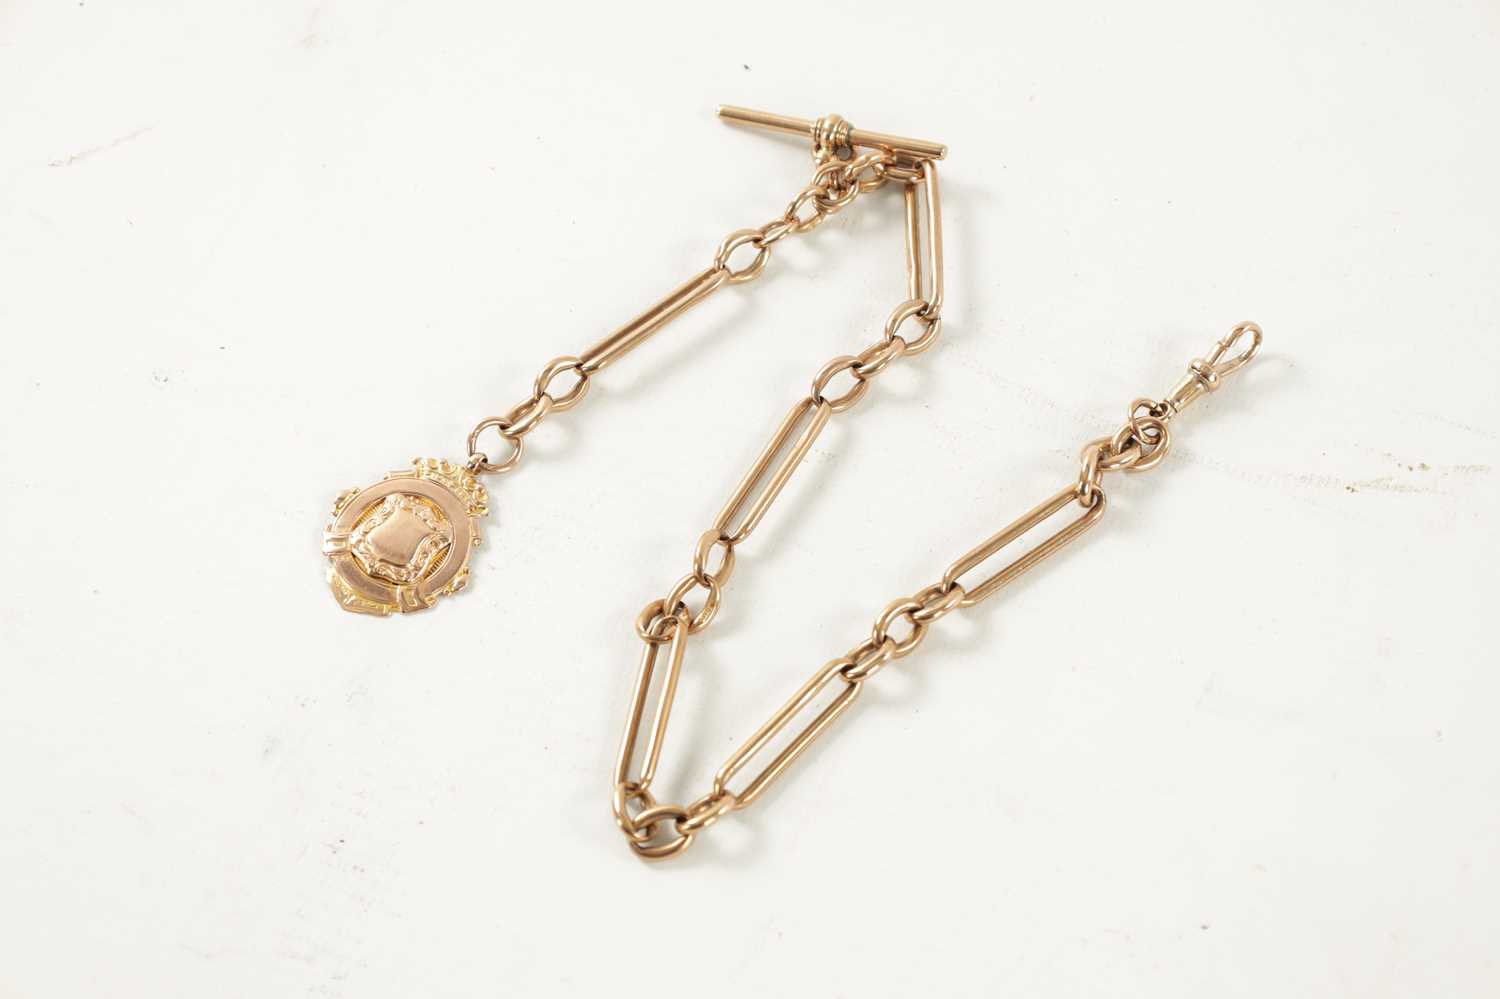 A 9CT ROSE GOLD TROMBONE LINK DOUBLE ALBERT WATCH CHAIN - Image 3 of 4